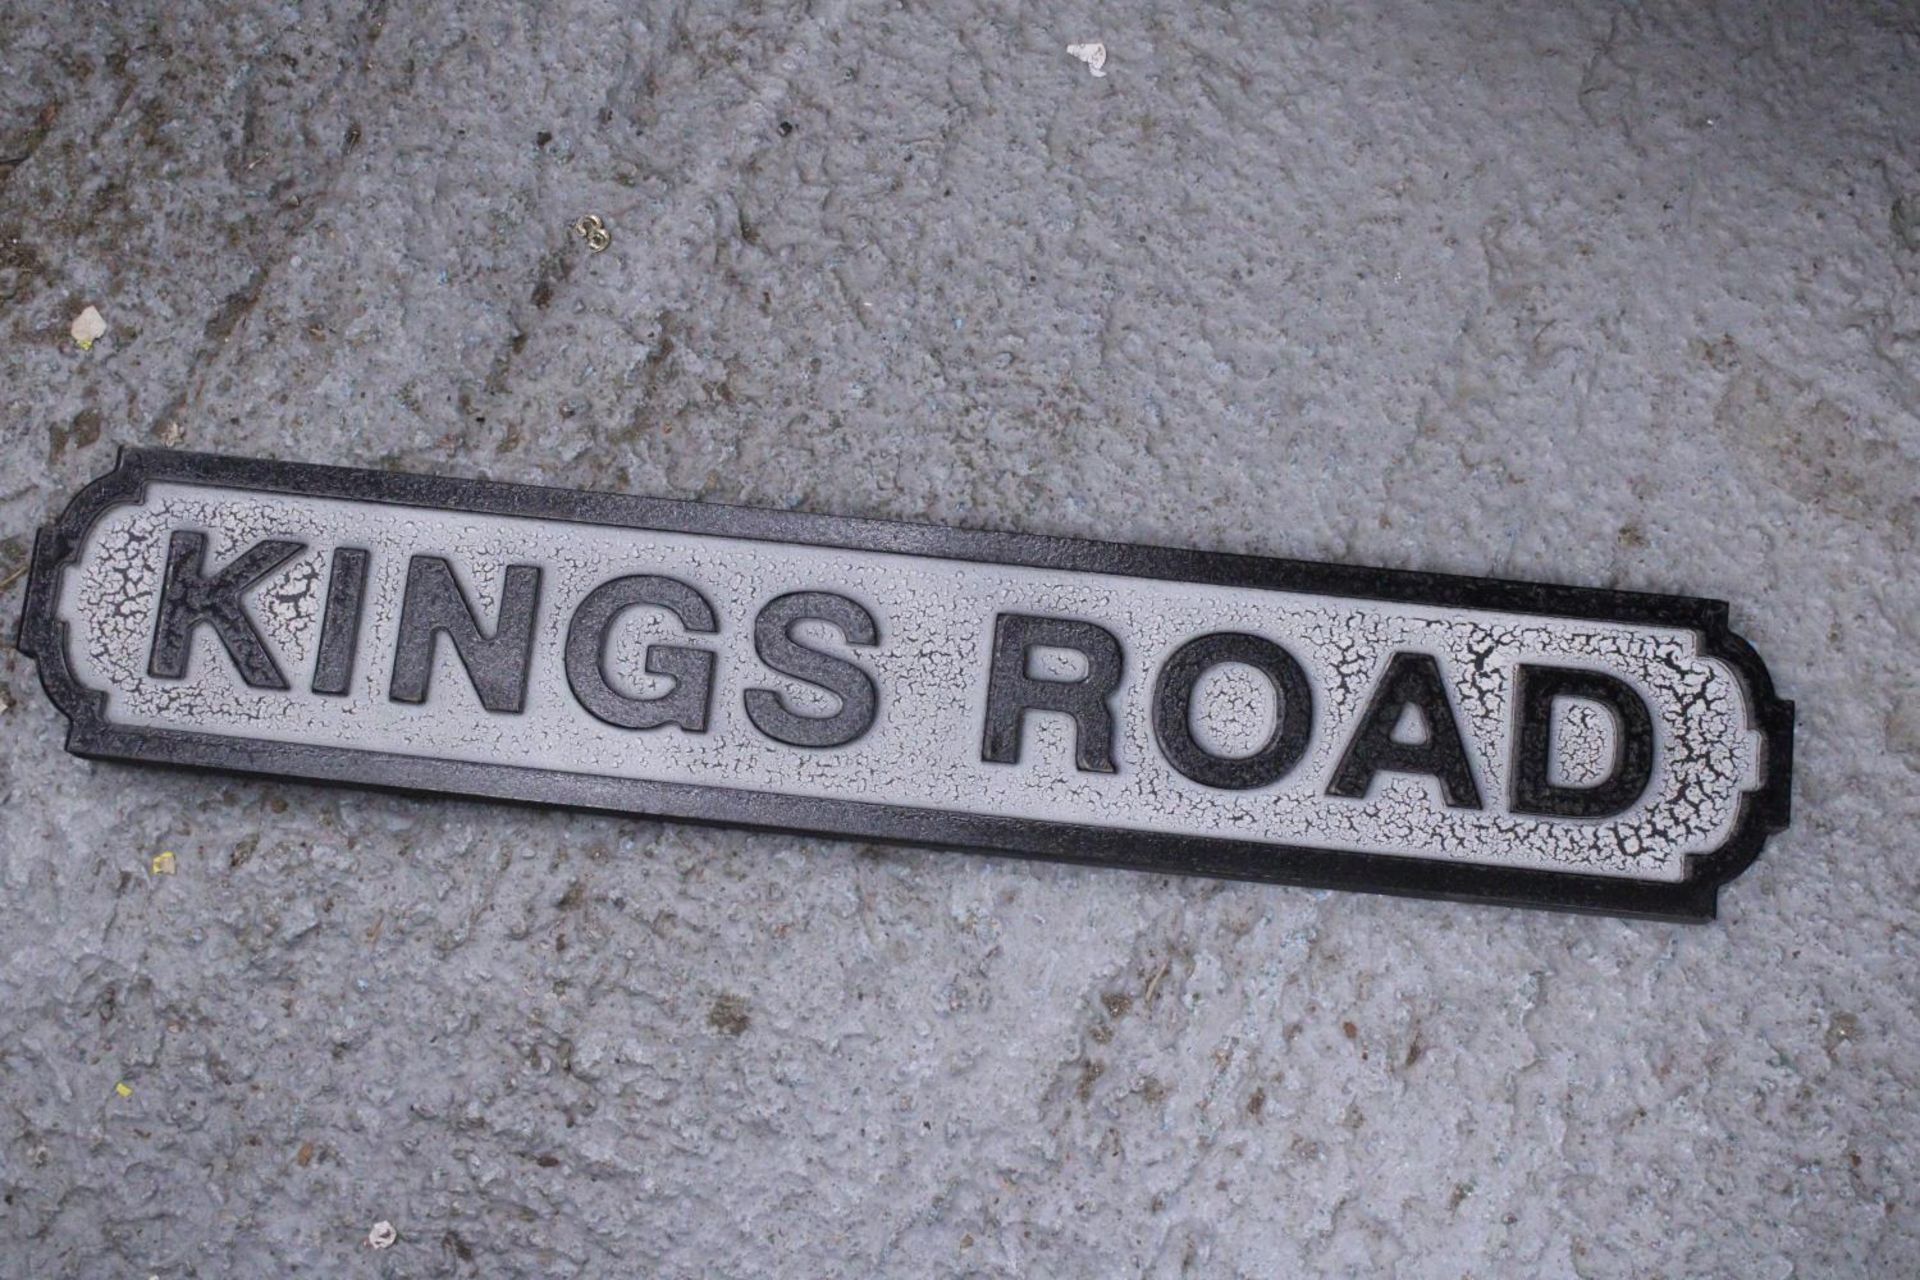 A 'KINGS ROAD' SIGN, 78CM X 14CM